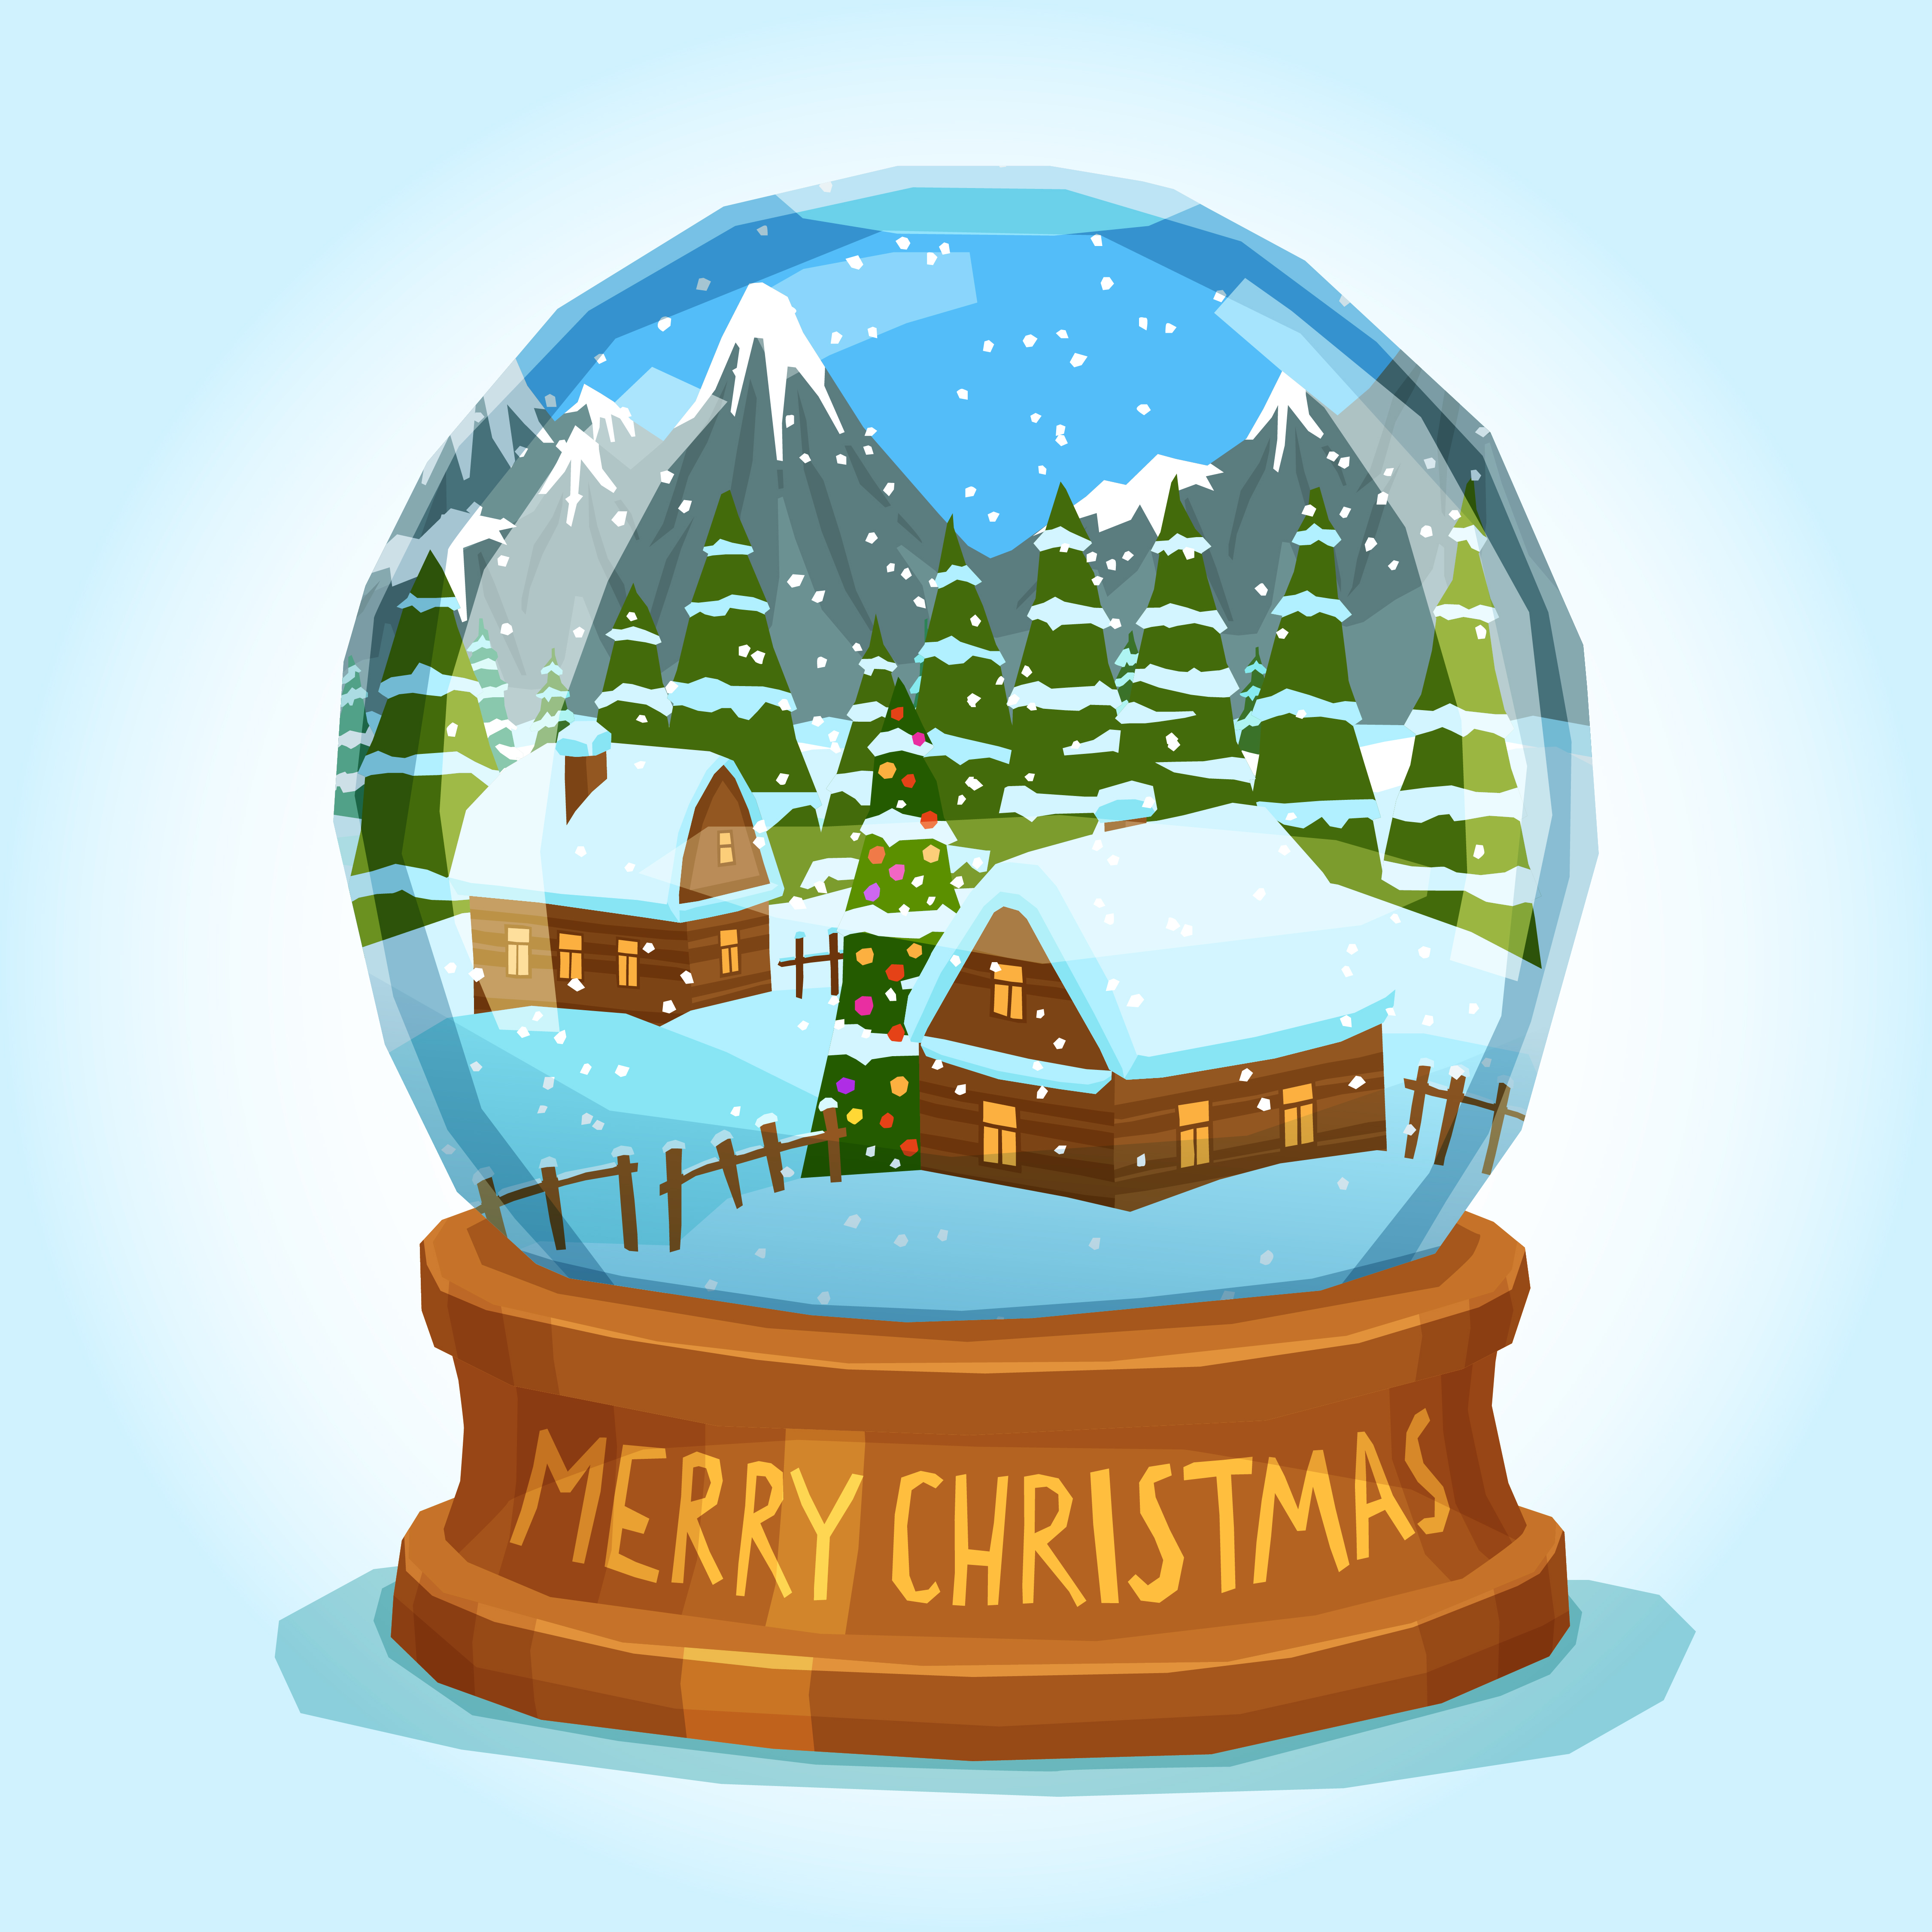 Download Snow Globe Merry Christmas Card - Download Free Vectors ...